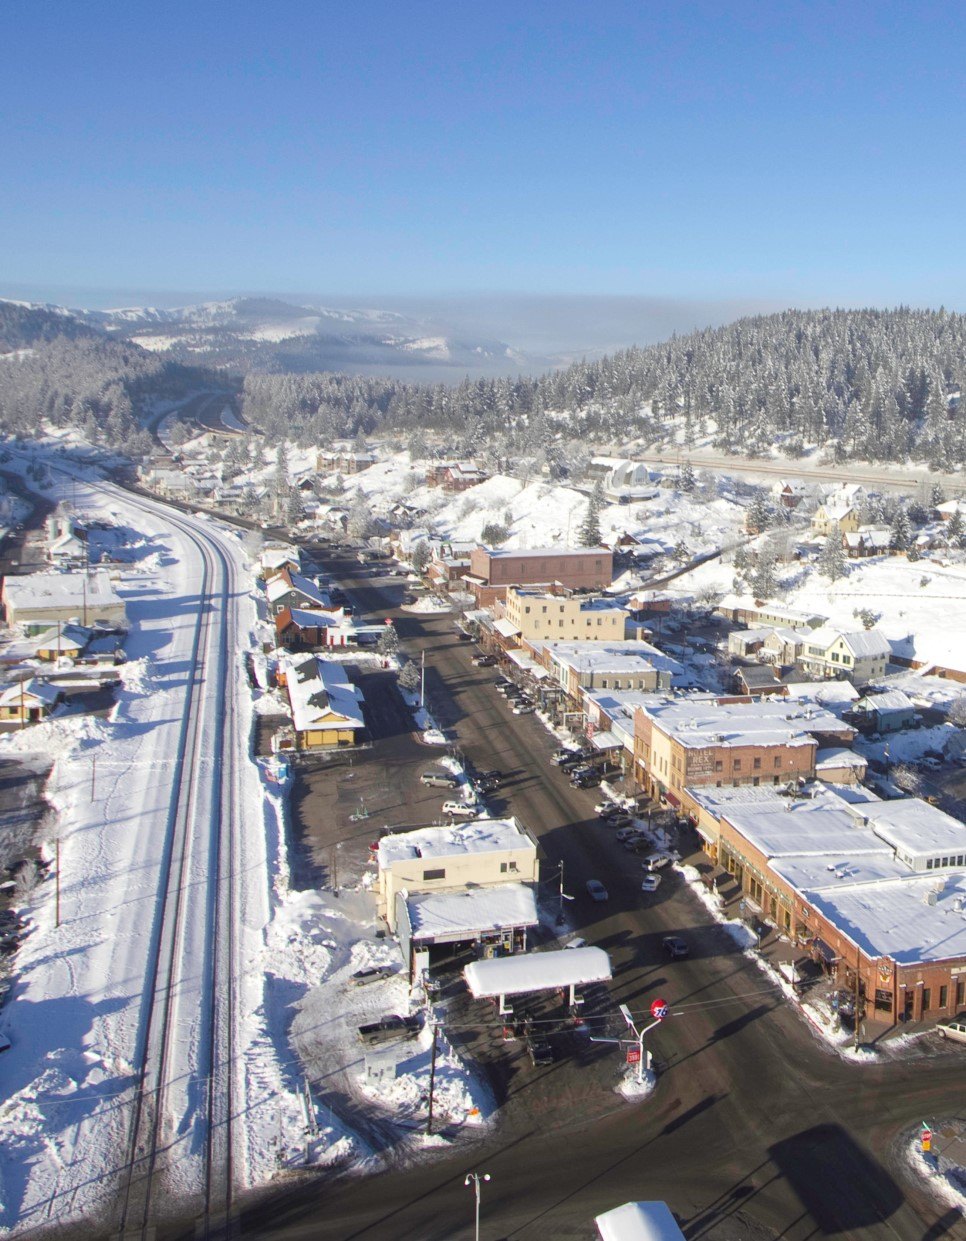 Town of Truckee